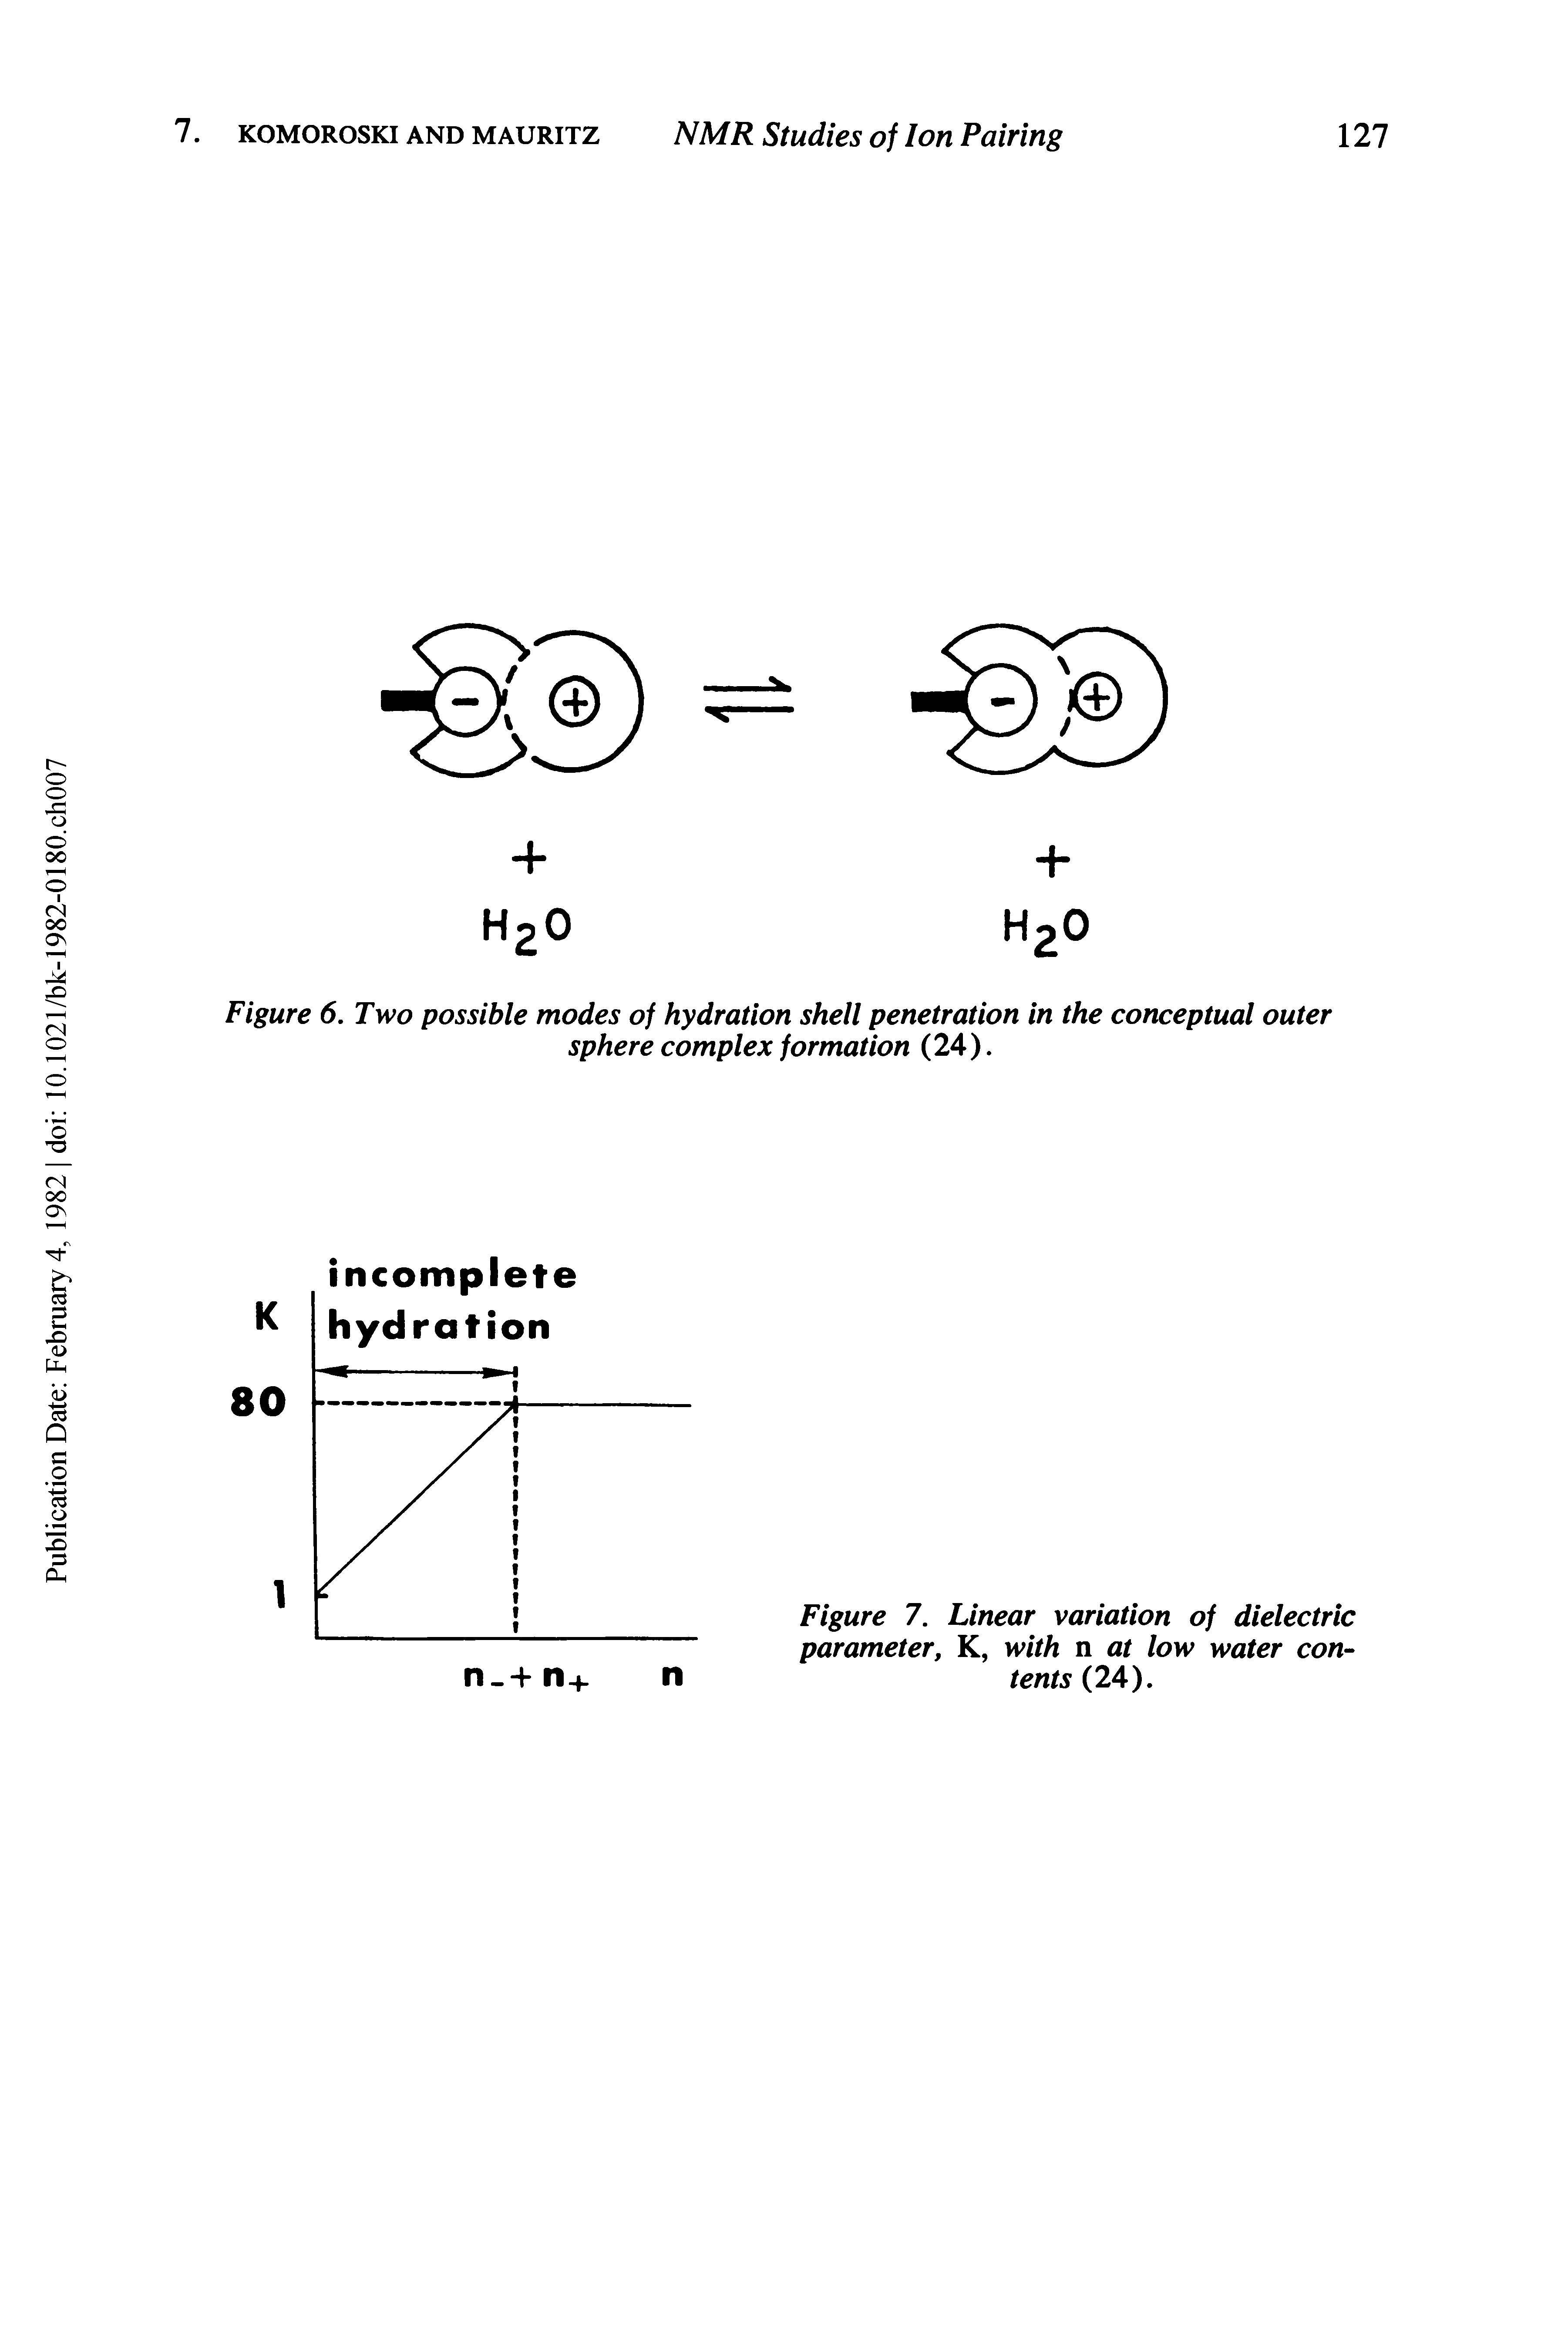 Figure 7. Linear variation of dielectric parameter, K, with n at low water contents (24).